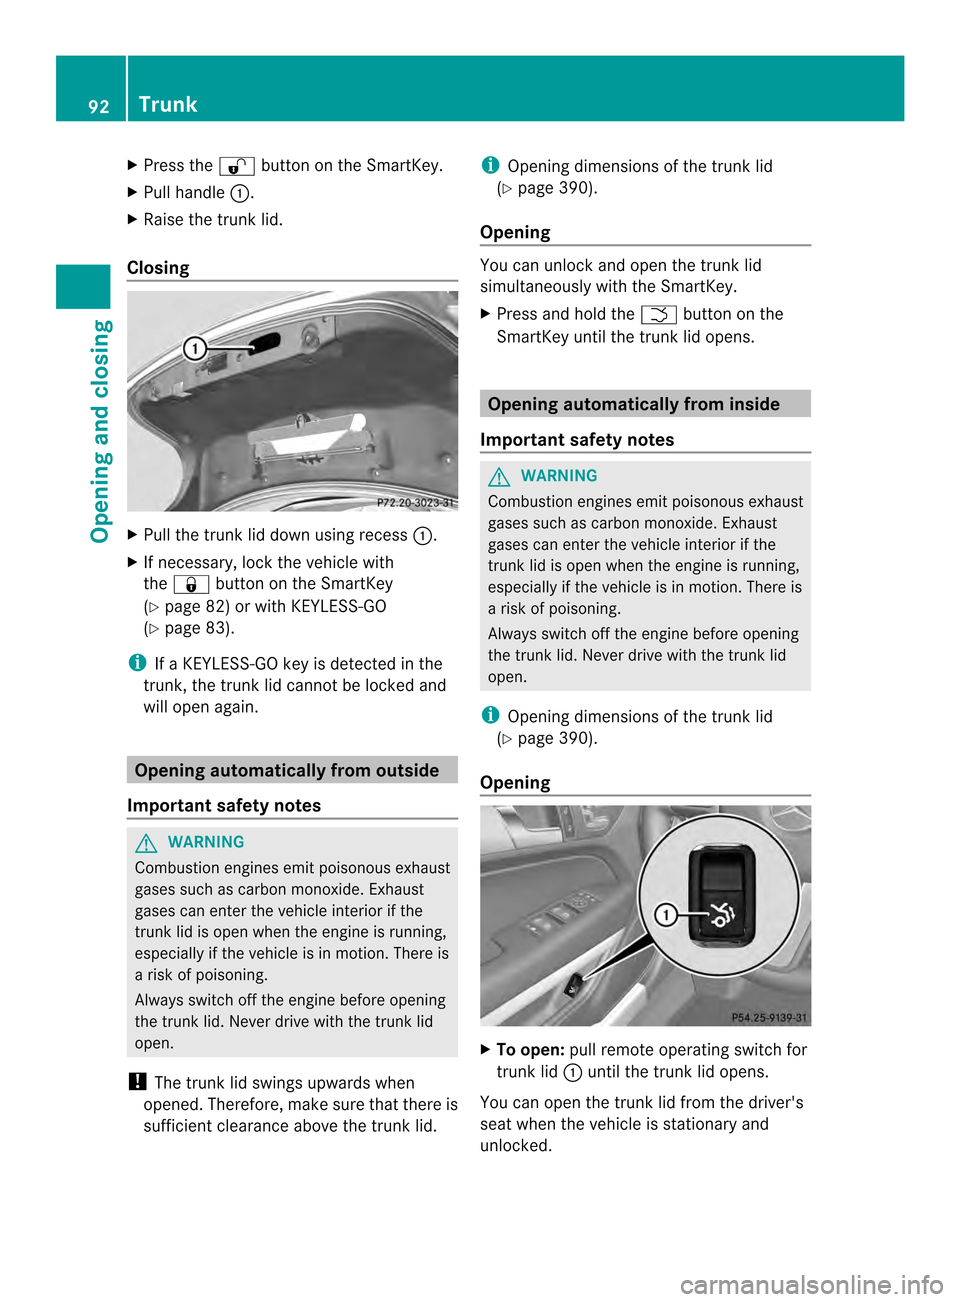 MERCEDES-BENZ E-Class CABRIOLET 2014 C207 Service Manual X
Press the 000Ebutton on the SmartKey.
X Pull handle 0002.
X Raise the trunkl id.
Closing X
Pull the trunk lid down using recess 0002.
X If necessary, lock the vehicle with
the 000D button on the Sma